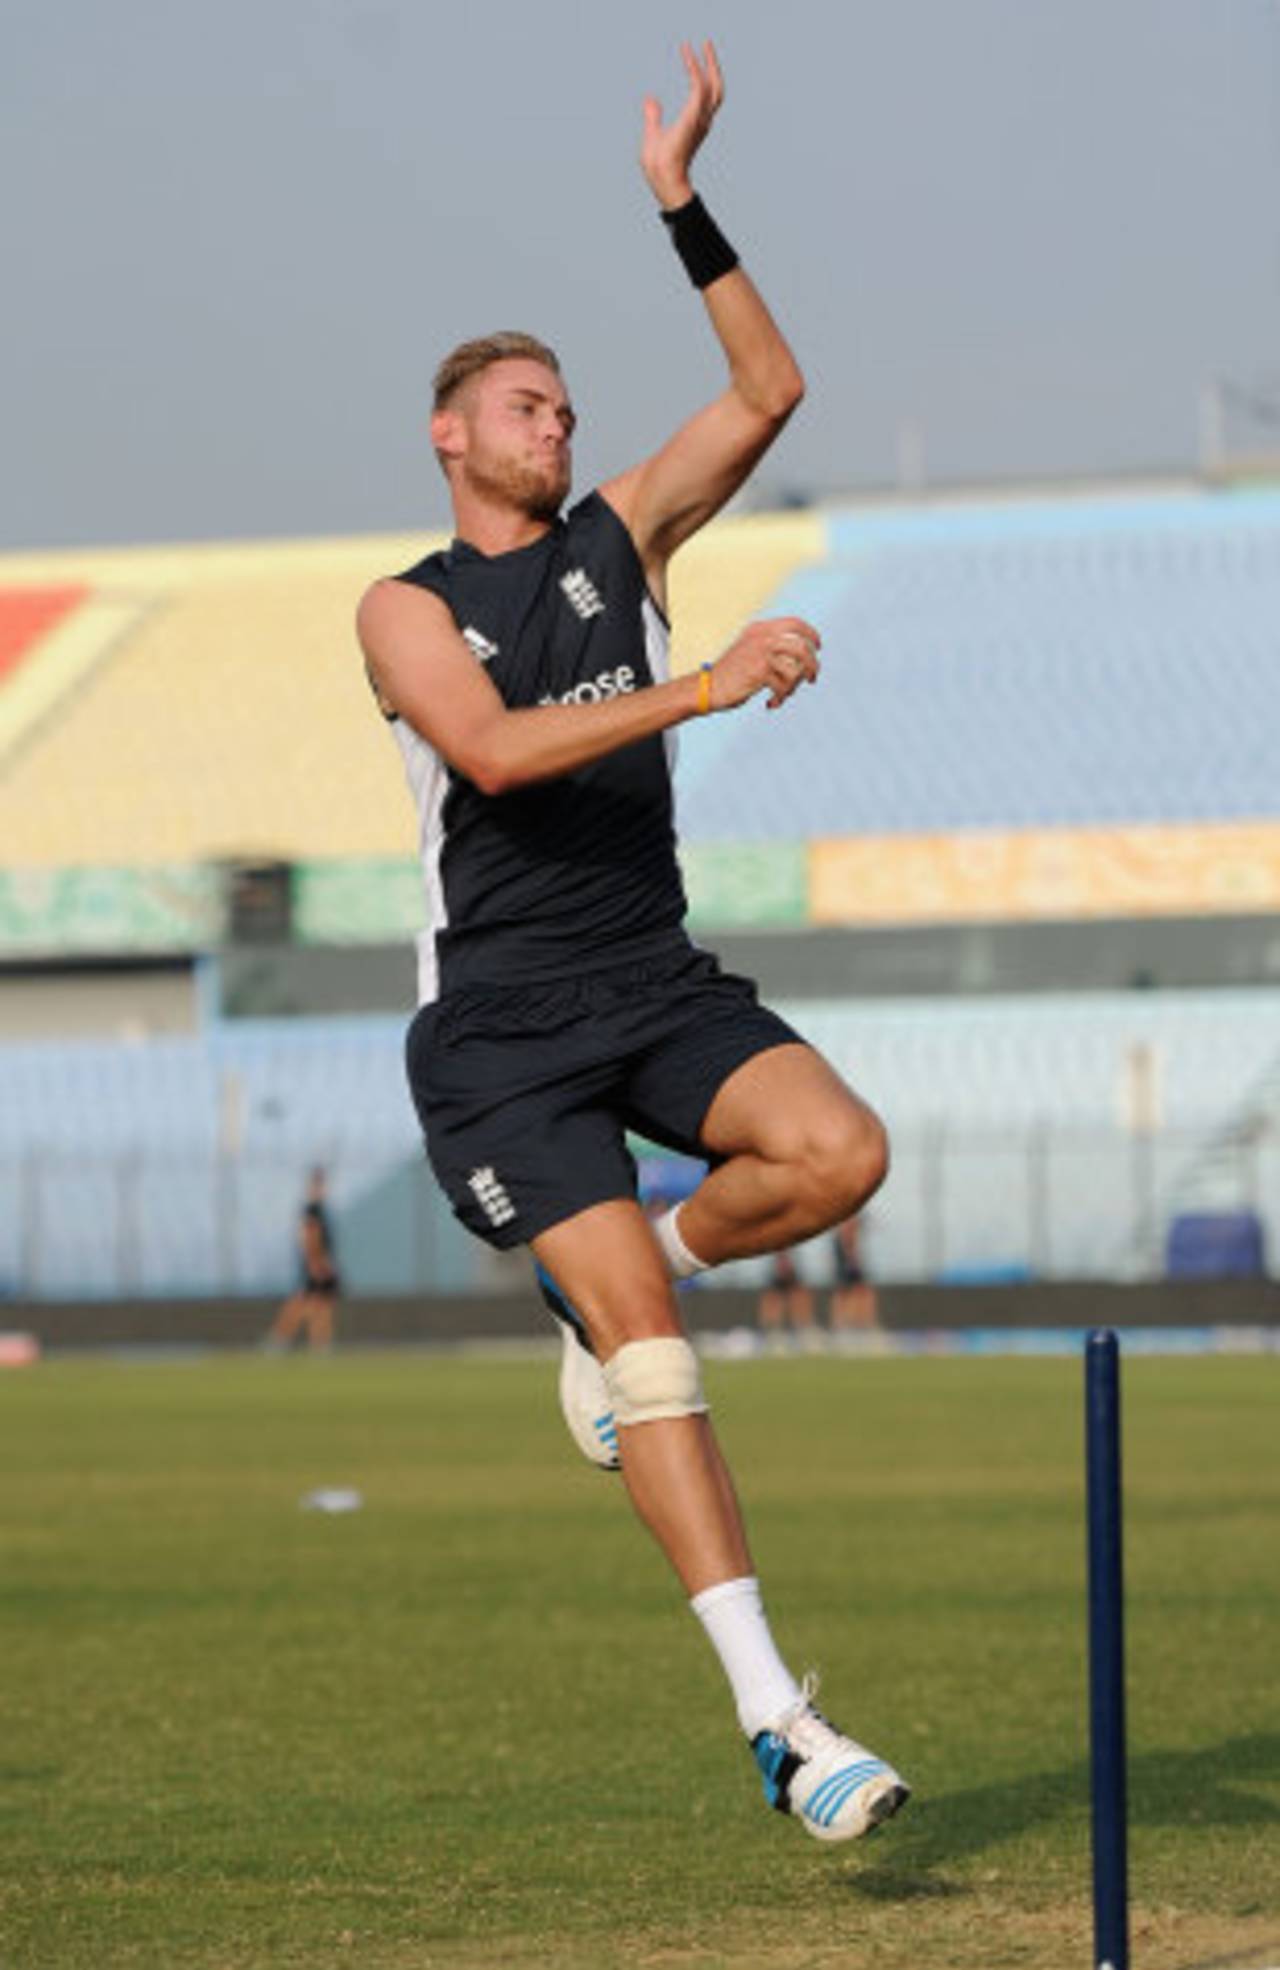 Stuart Broad bowls with his knee bandaged, Chittagong, March 21, 2014